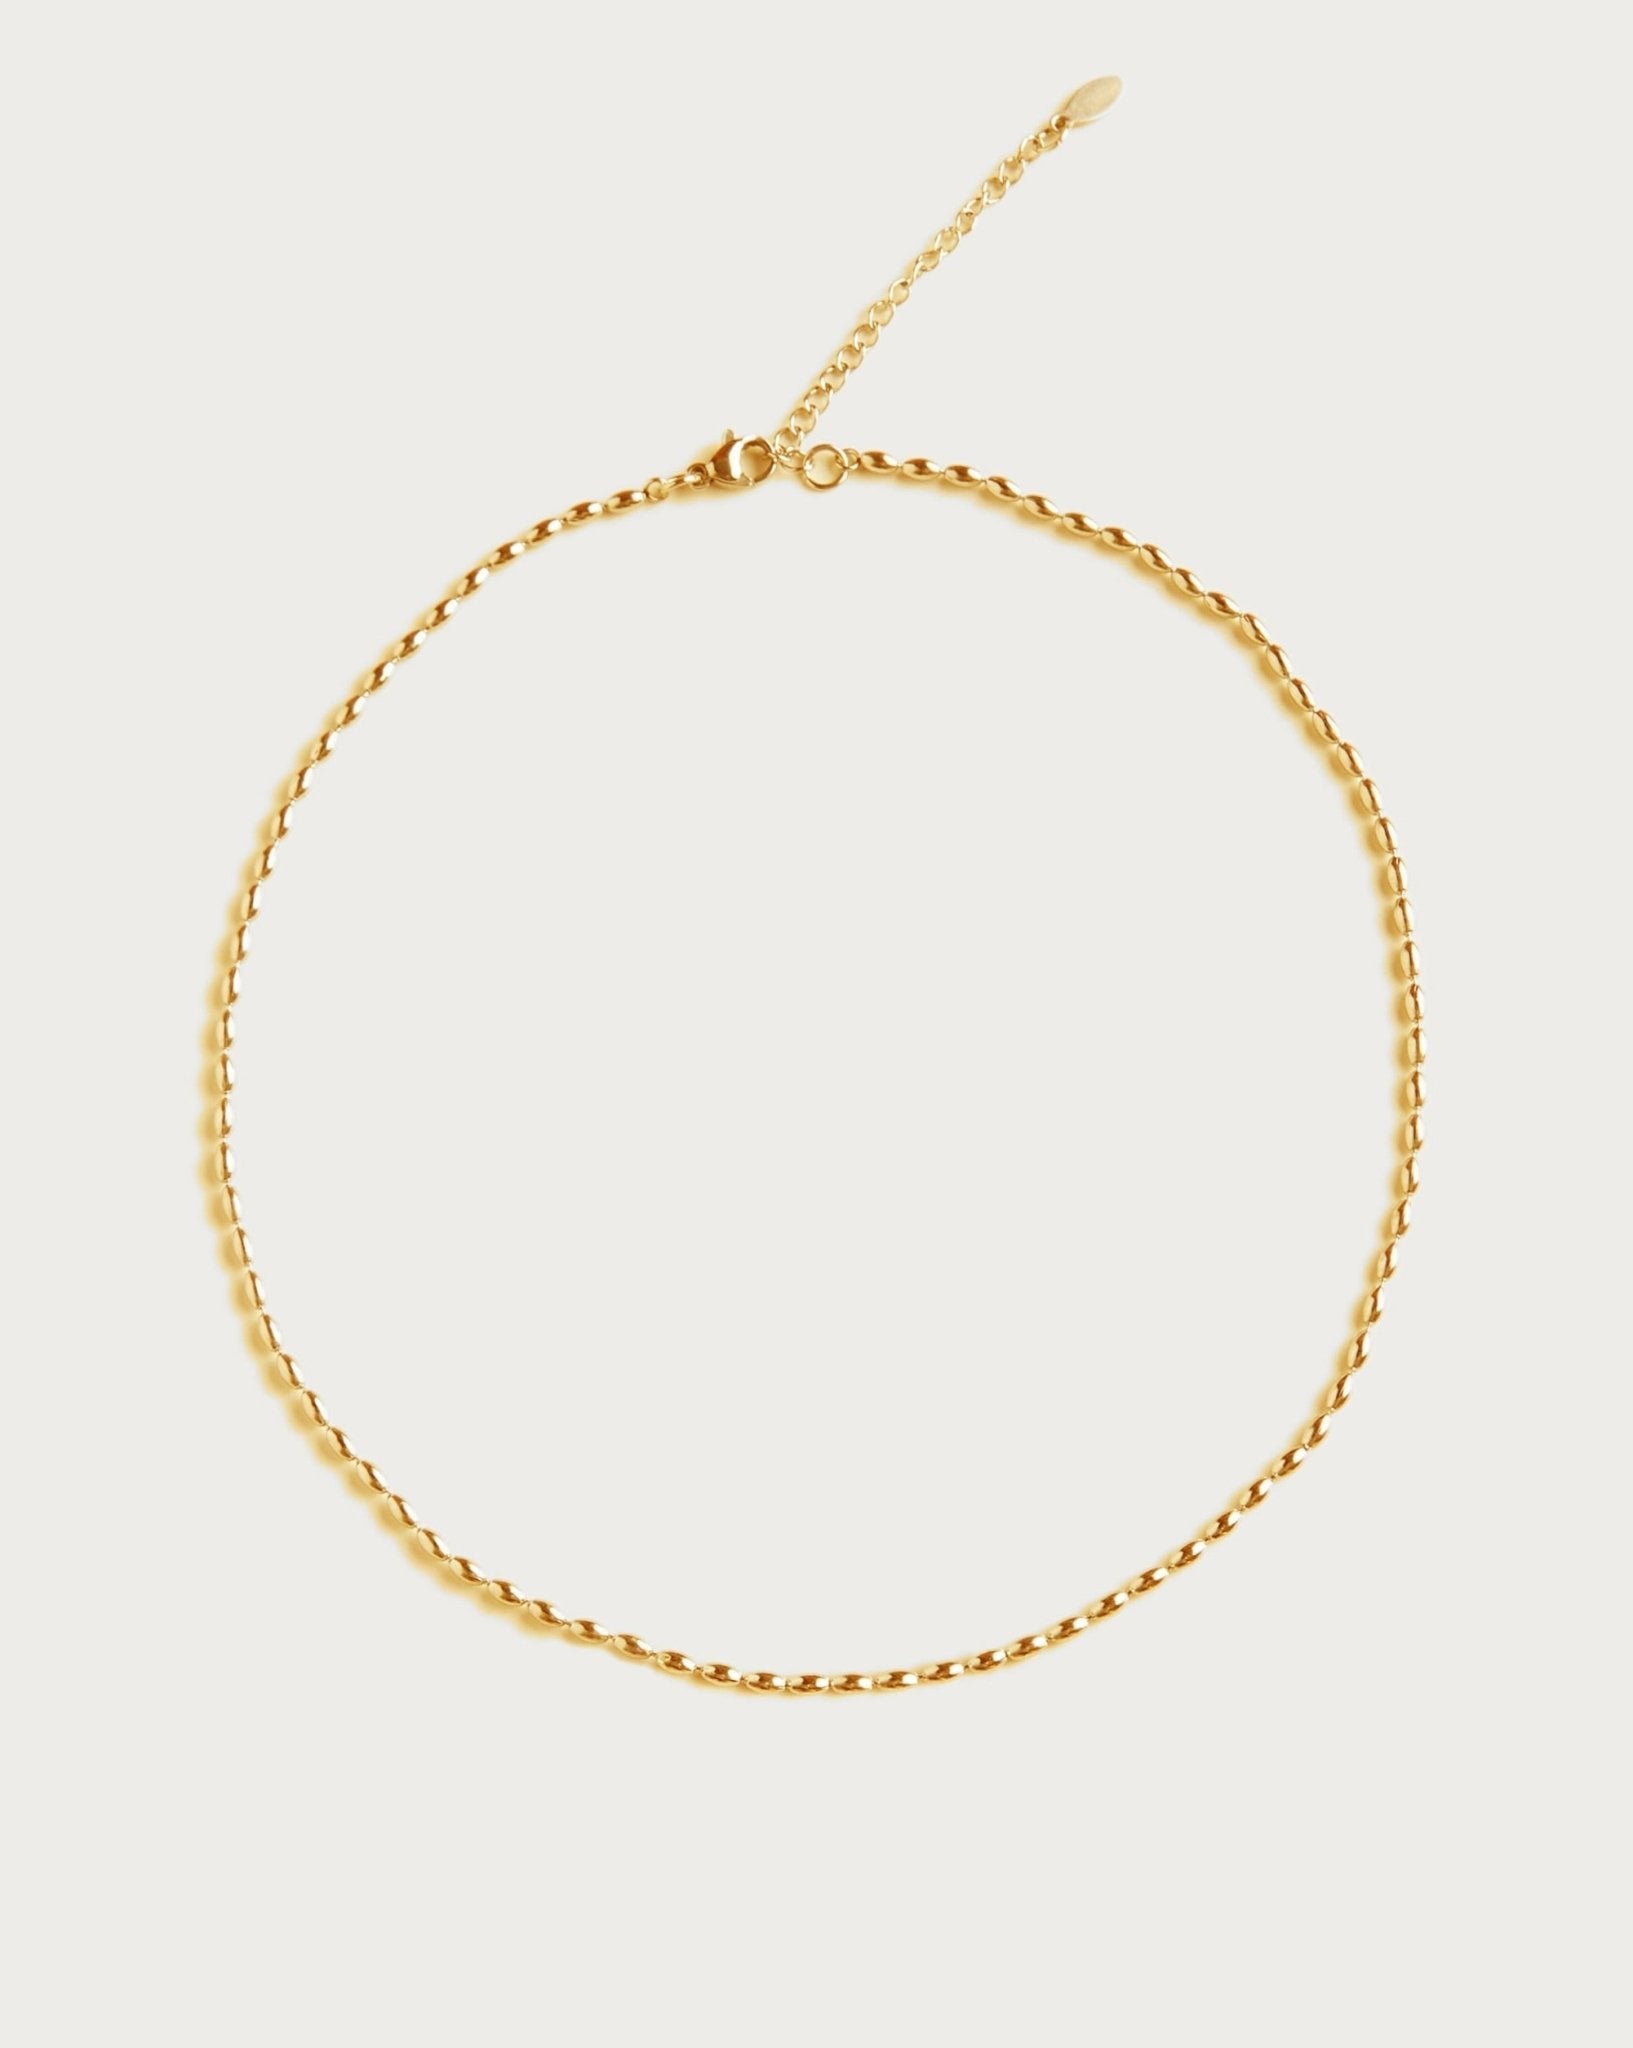 Mini Metal Beads Necklace in Gold